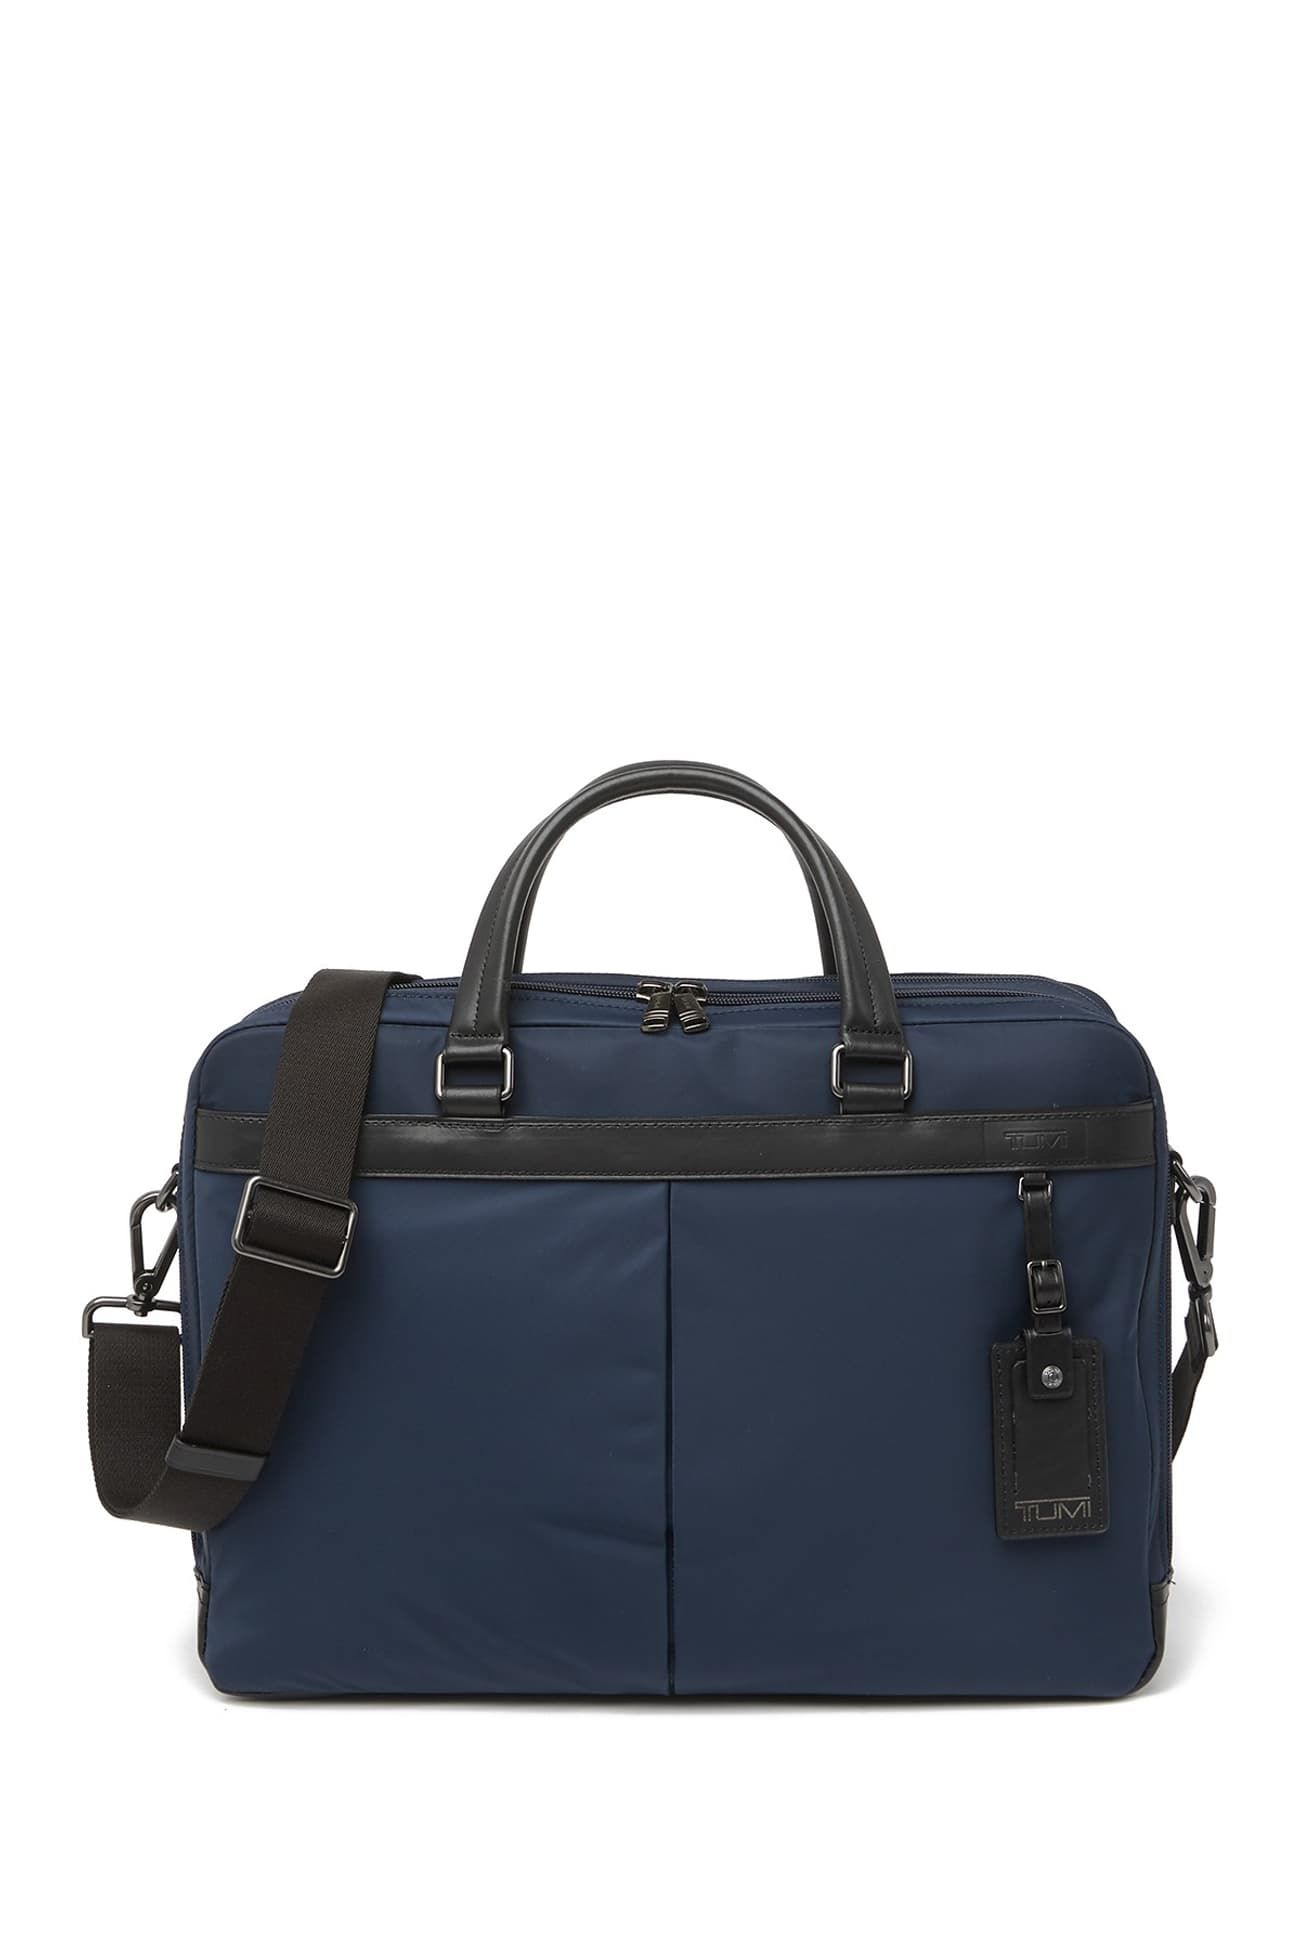 Save up to 40% on TUMI bags during this Nordstrom Rack flash sale - nrd.kbic-nsn.gov